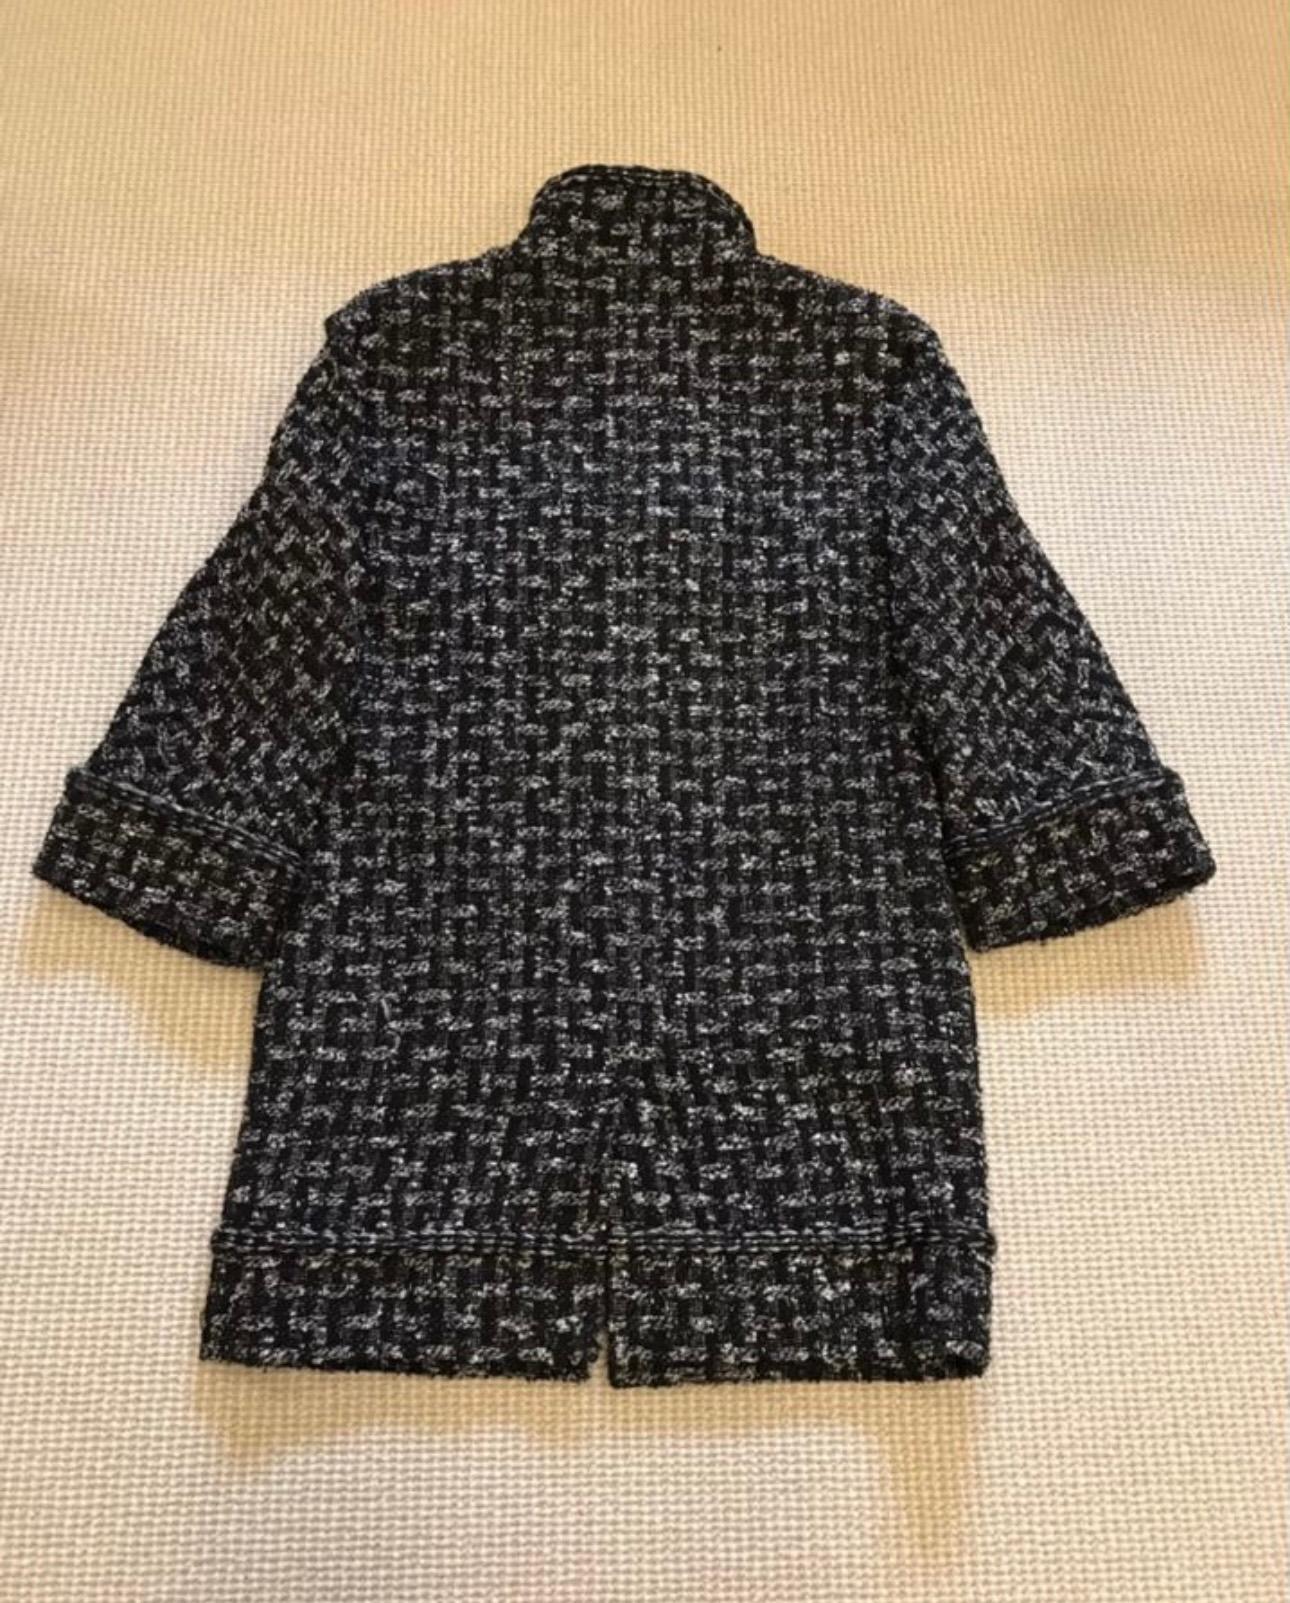 Women's or Men's Chanel CC Buttons Oversized Black Tweed Jacket / Coat For Sale